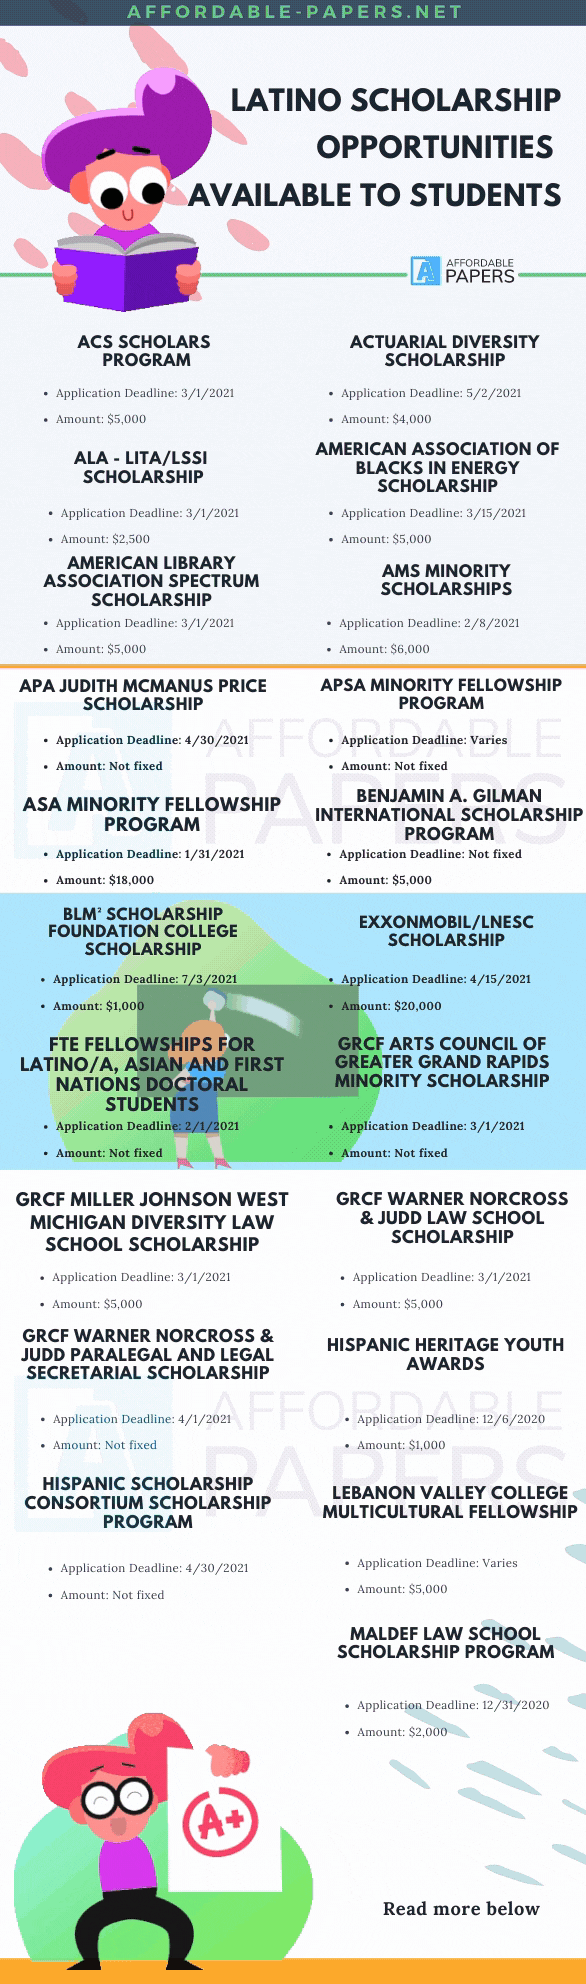 Latino Scholarship Opportunities Available to Students #Infographic